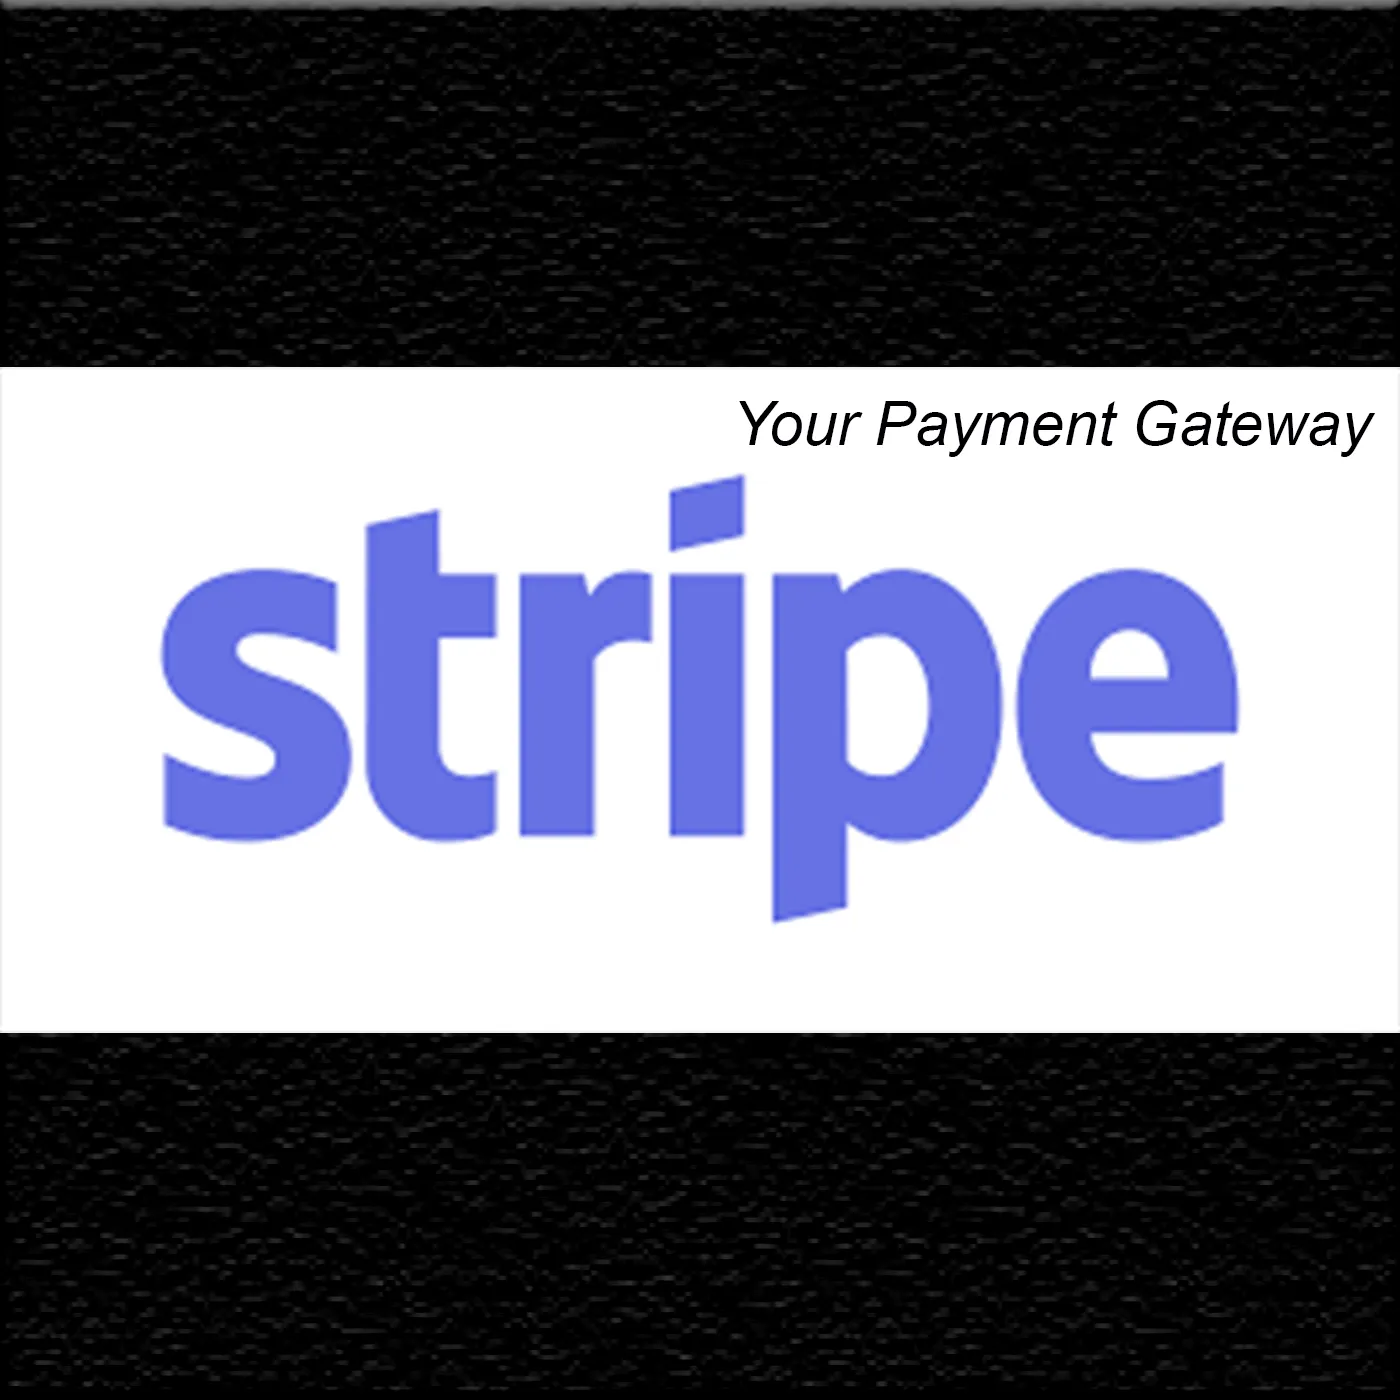 Stripe (Your Payment Gateway)